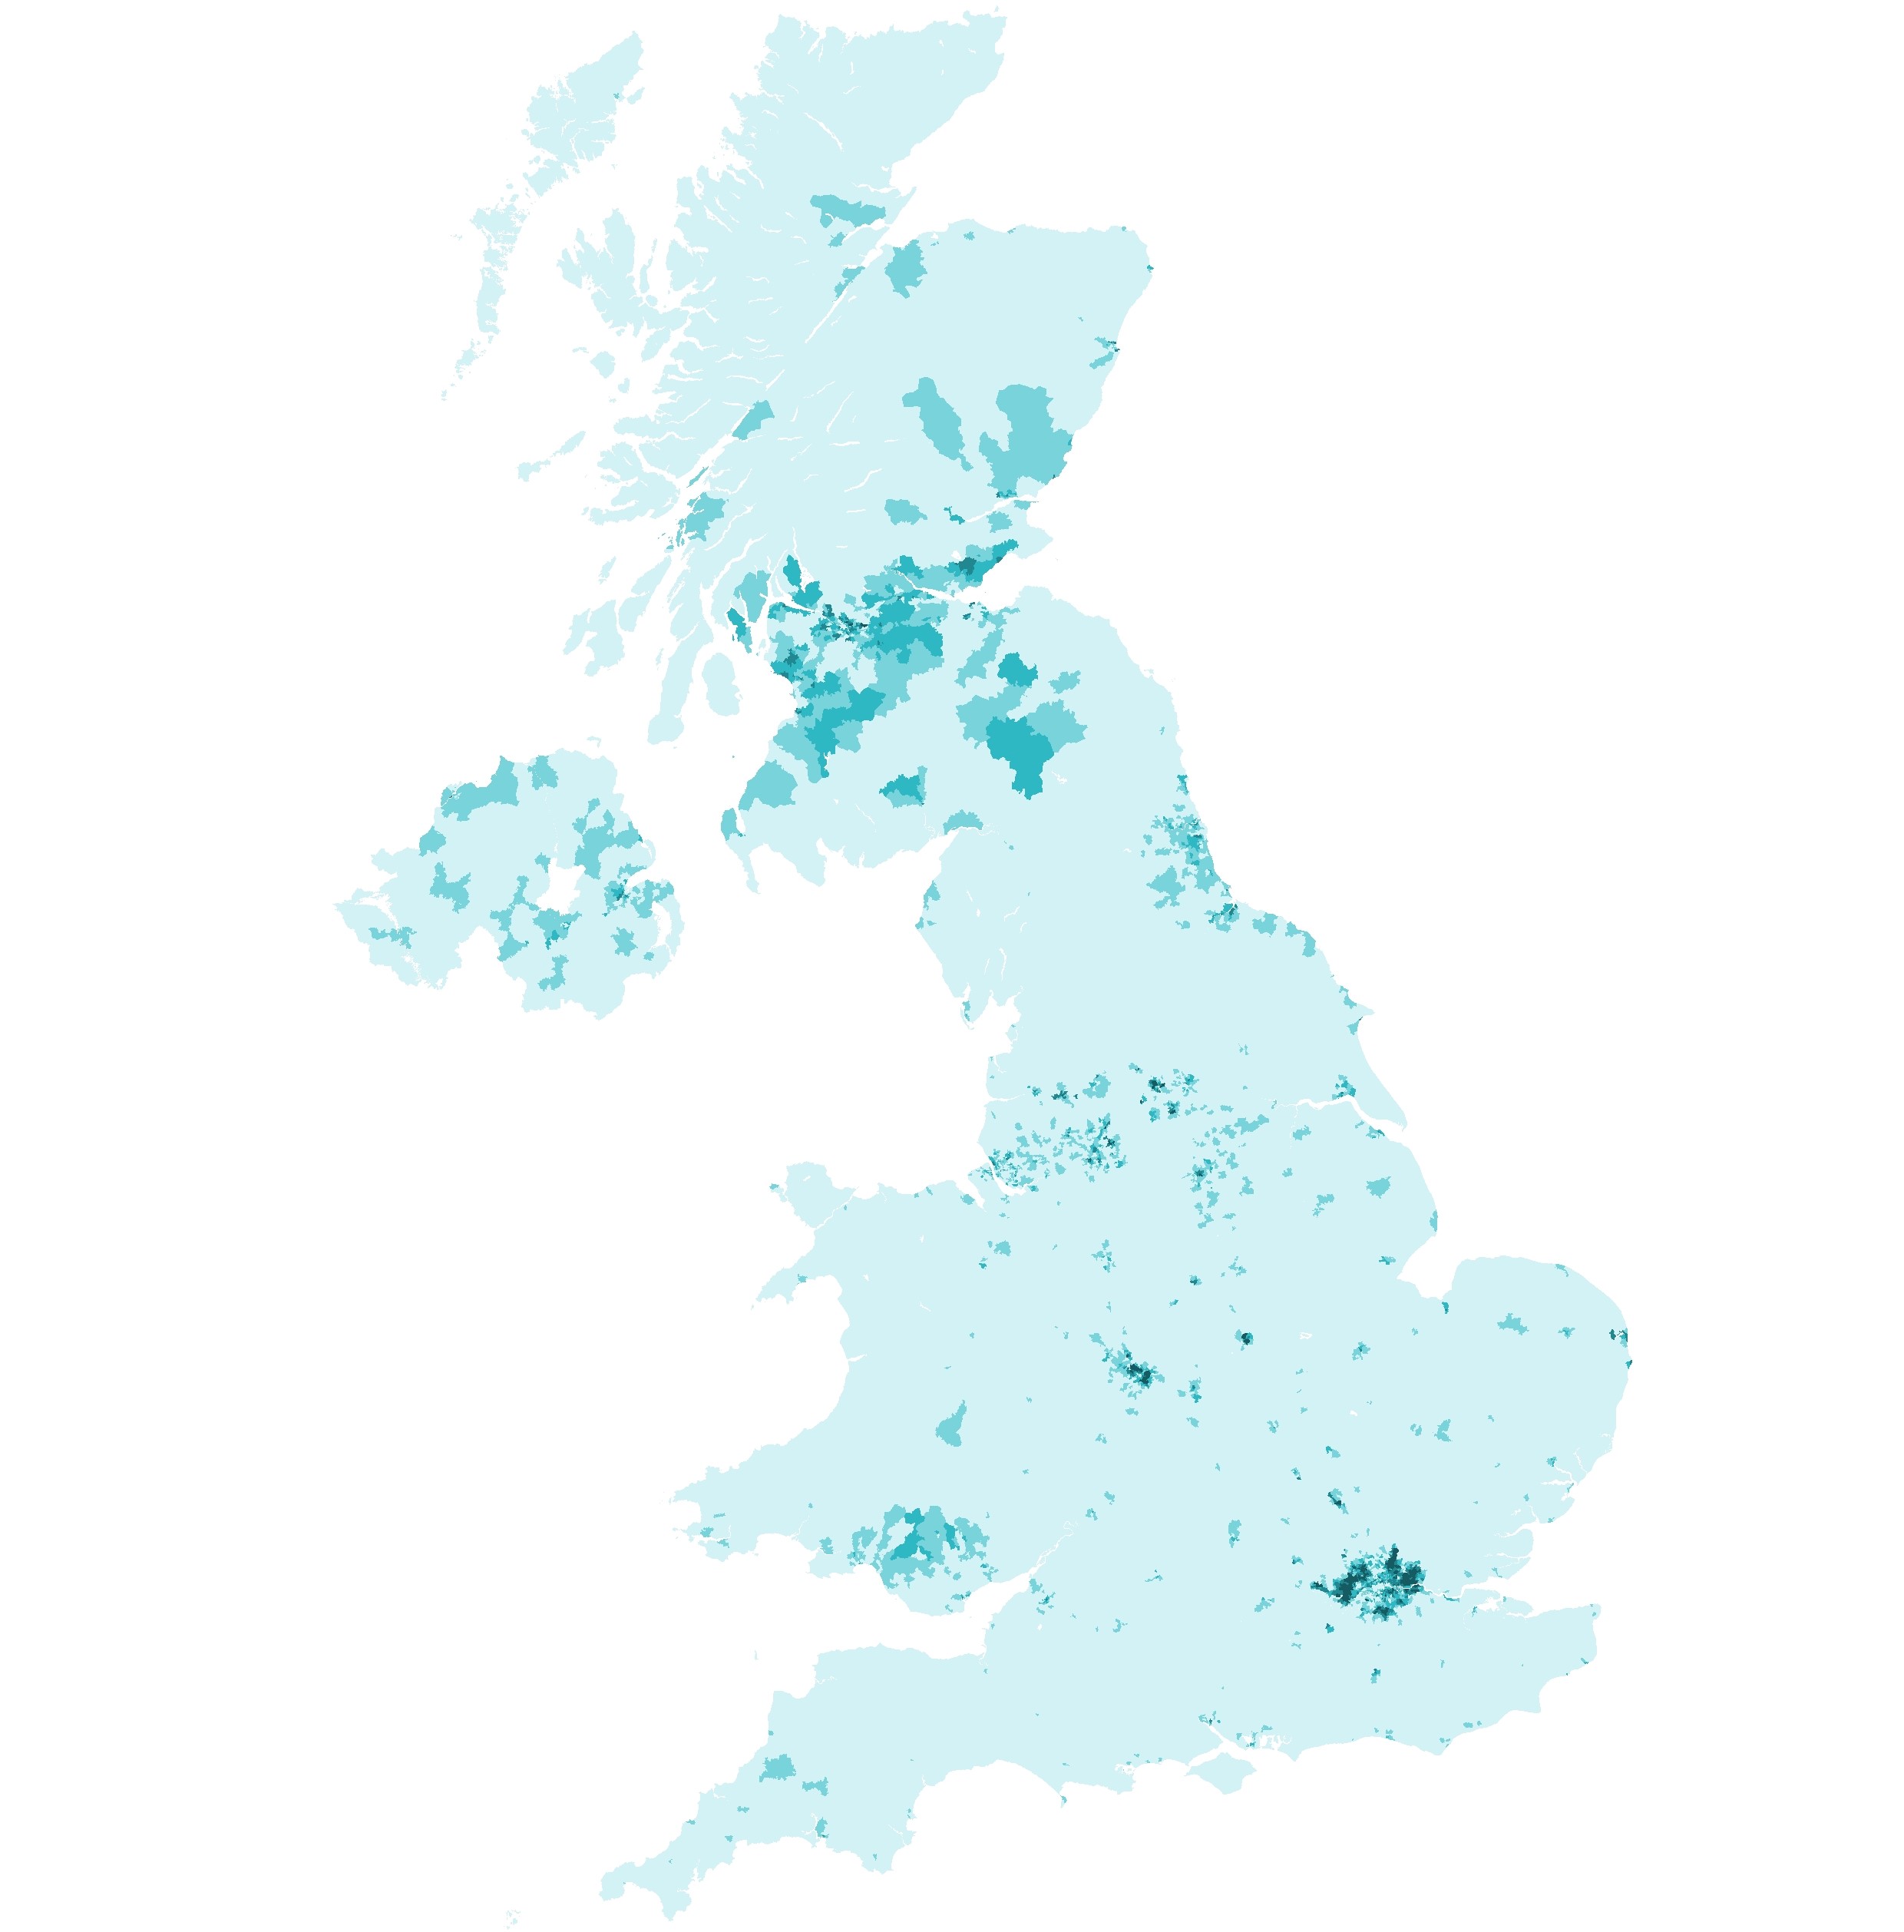 A heatmap shows the distribtion of this segment around the UK, and teh colours are very very surrounding and in London where the segment is concentrated, as well as much of south Scotland and south Wales